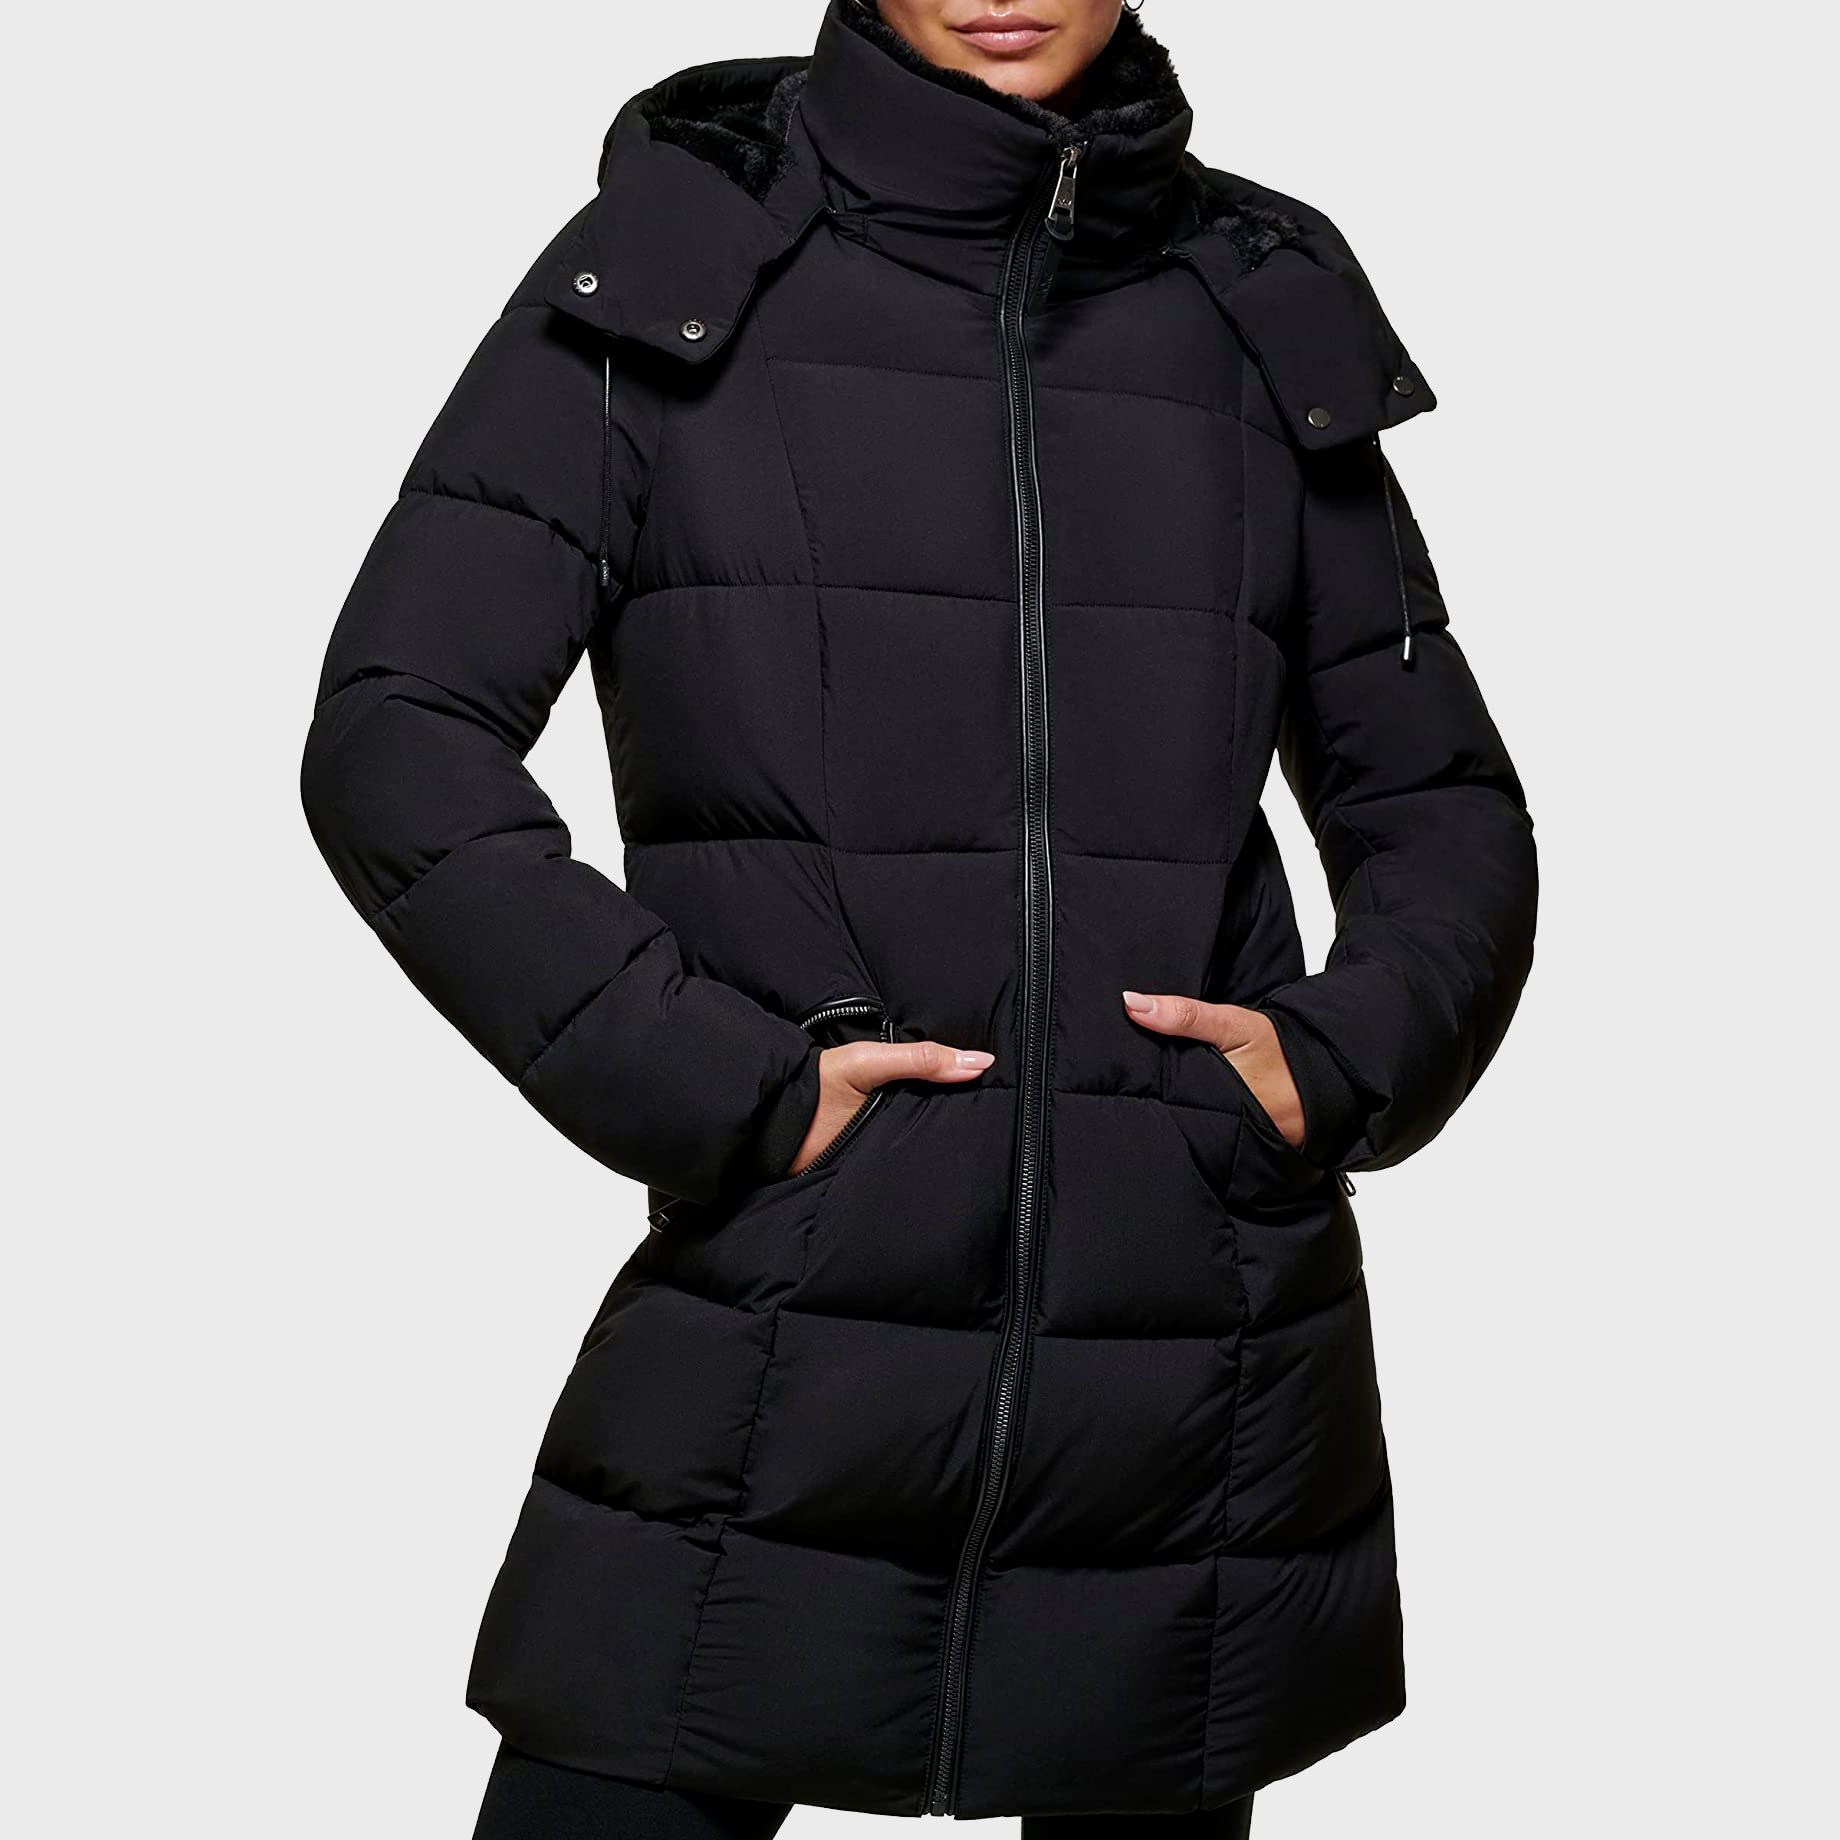 parti let risiko Winter Coat Sales Are Here—Save Up to 63% on Top Brands